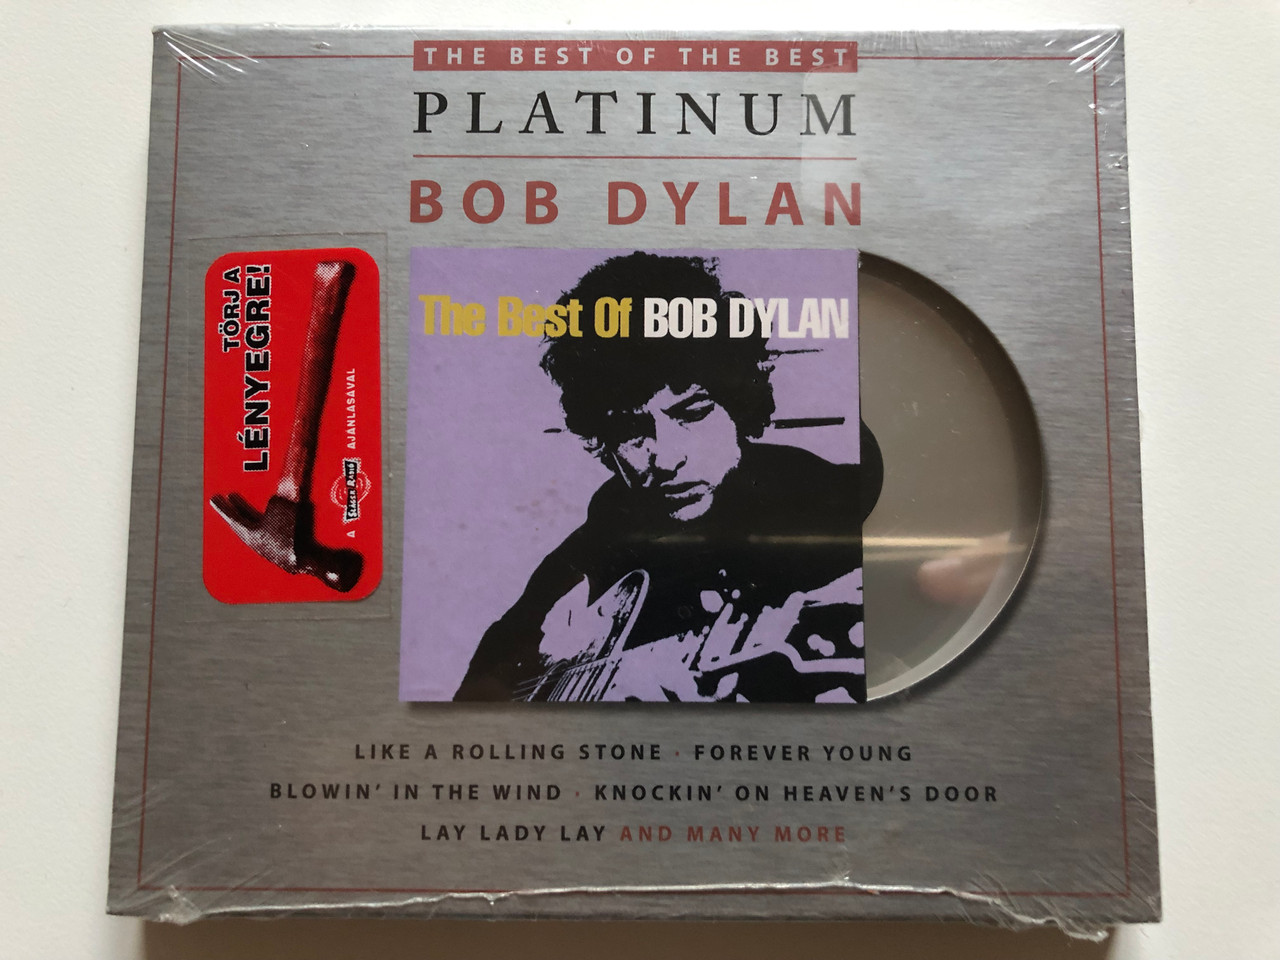 https://cdn10.bigcommerce.com/s-62bdpkt7pb/products/0/images/210518/The_Best_Of_Bob_Dylan_The_Best_Of_The_Best_-_Platinum_-_Bob_Dylan_Like_A_Rolling_Stone_Forever_Young_Blowin_In_The_Wind_Knockin_On_Heavens_Door_Lay_Lady_Lay_and_many_more_Columbia_A_1__93897.1643624098.1280.1280.JPG?c=2&_gl=1*4z4n6q*_ga*MjA2NTIxMjE2MC4xNTkwNTEyNTMy*_ga_WS2VZYPC6G*MTY0MzYxMzI3MC4yODAuMS4xNjQzNjIzNDc4LjYw